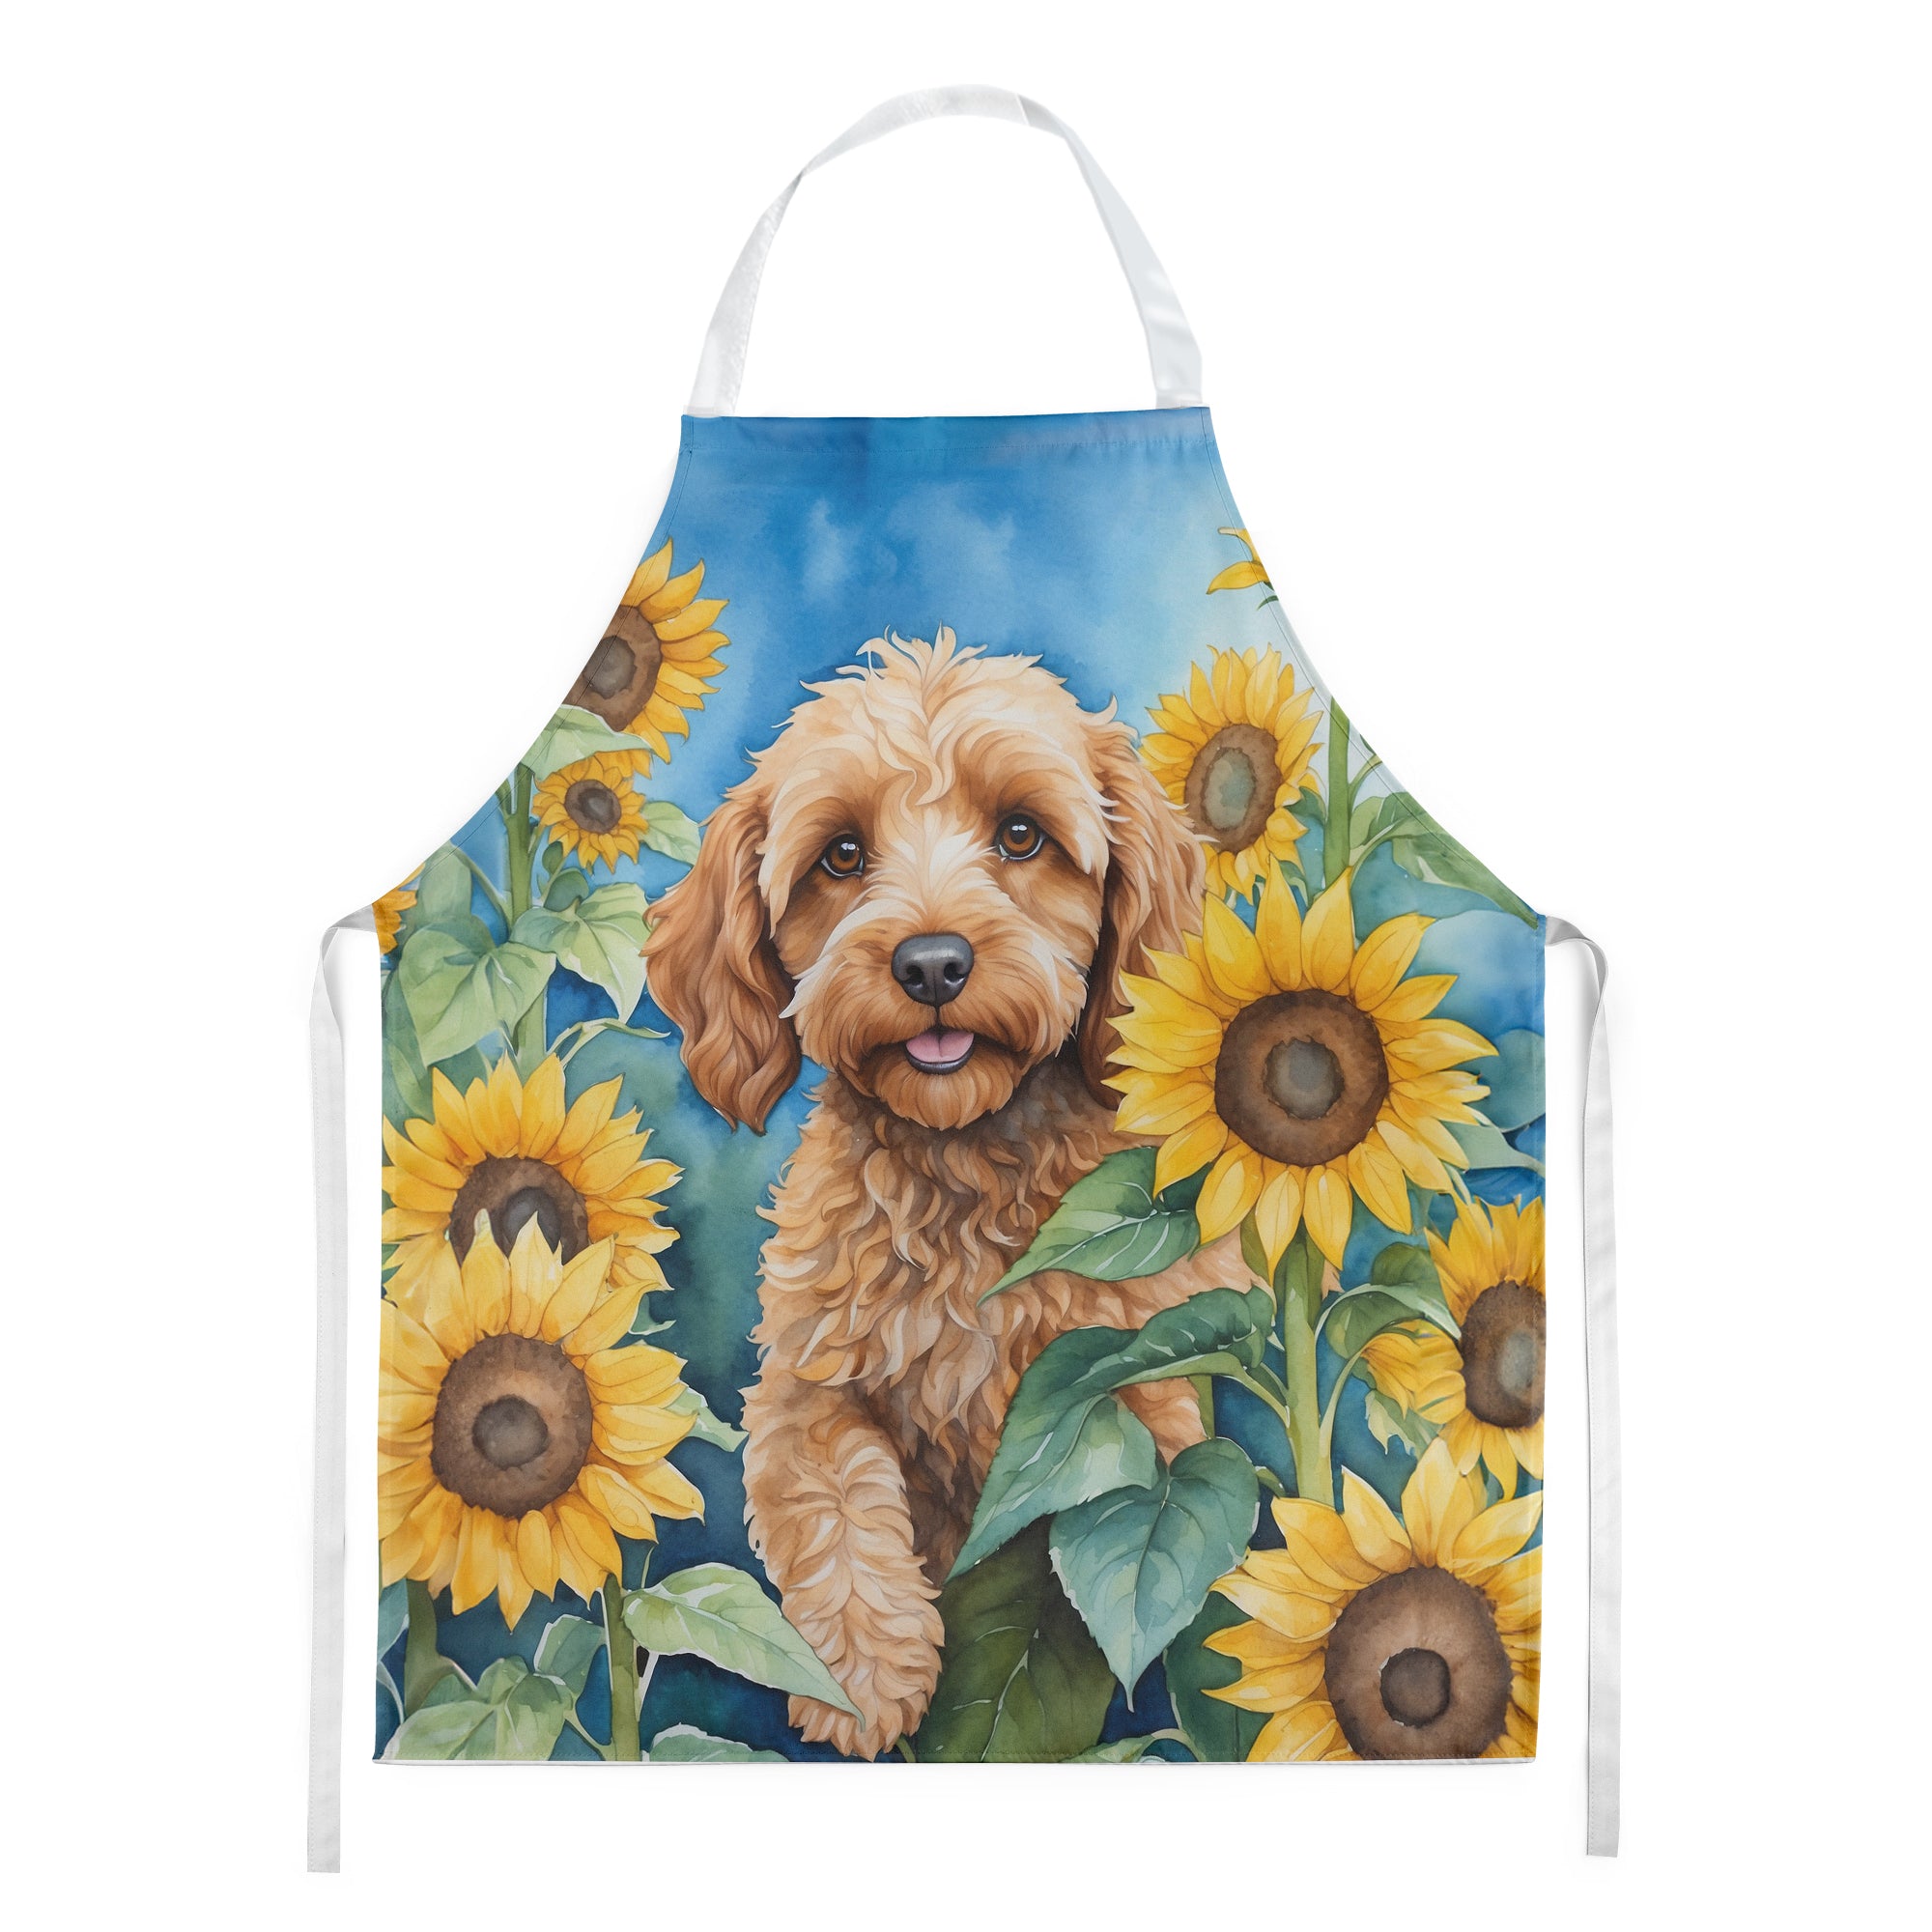 Buy this Cockapoo in Sunflowers Apron